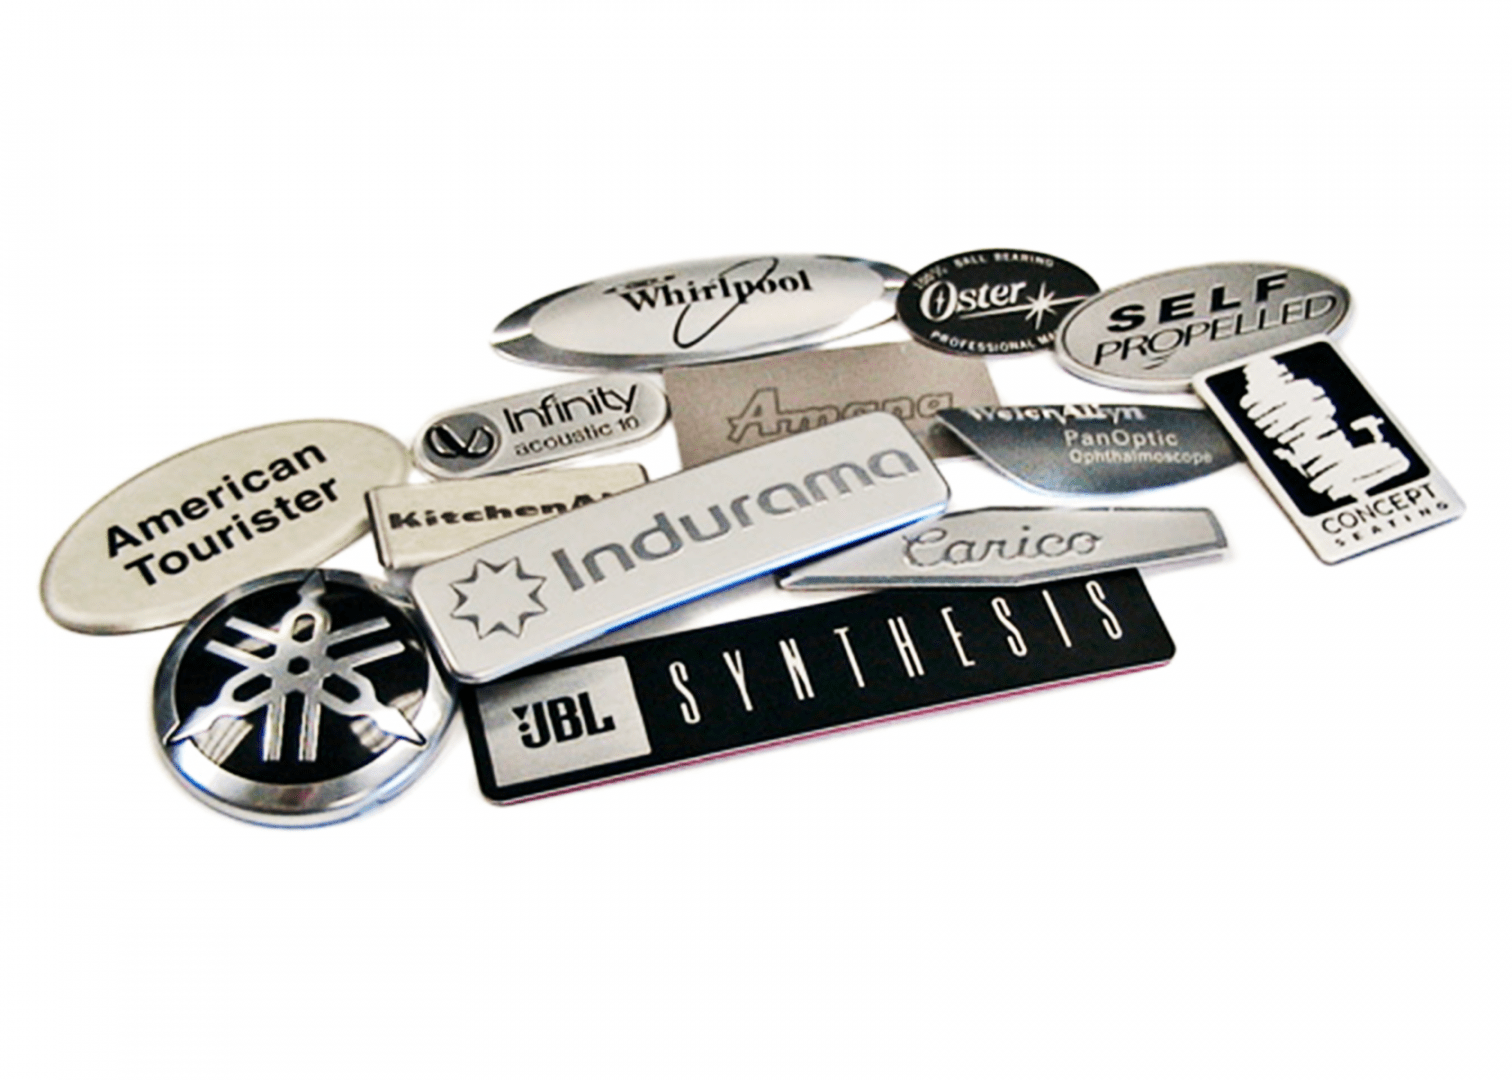 Innovative Uses of Customized Metal Tags Across Industries